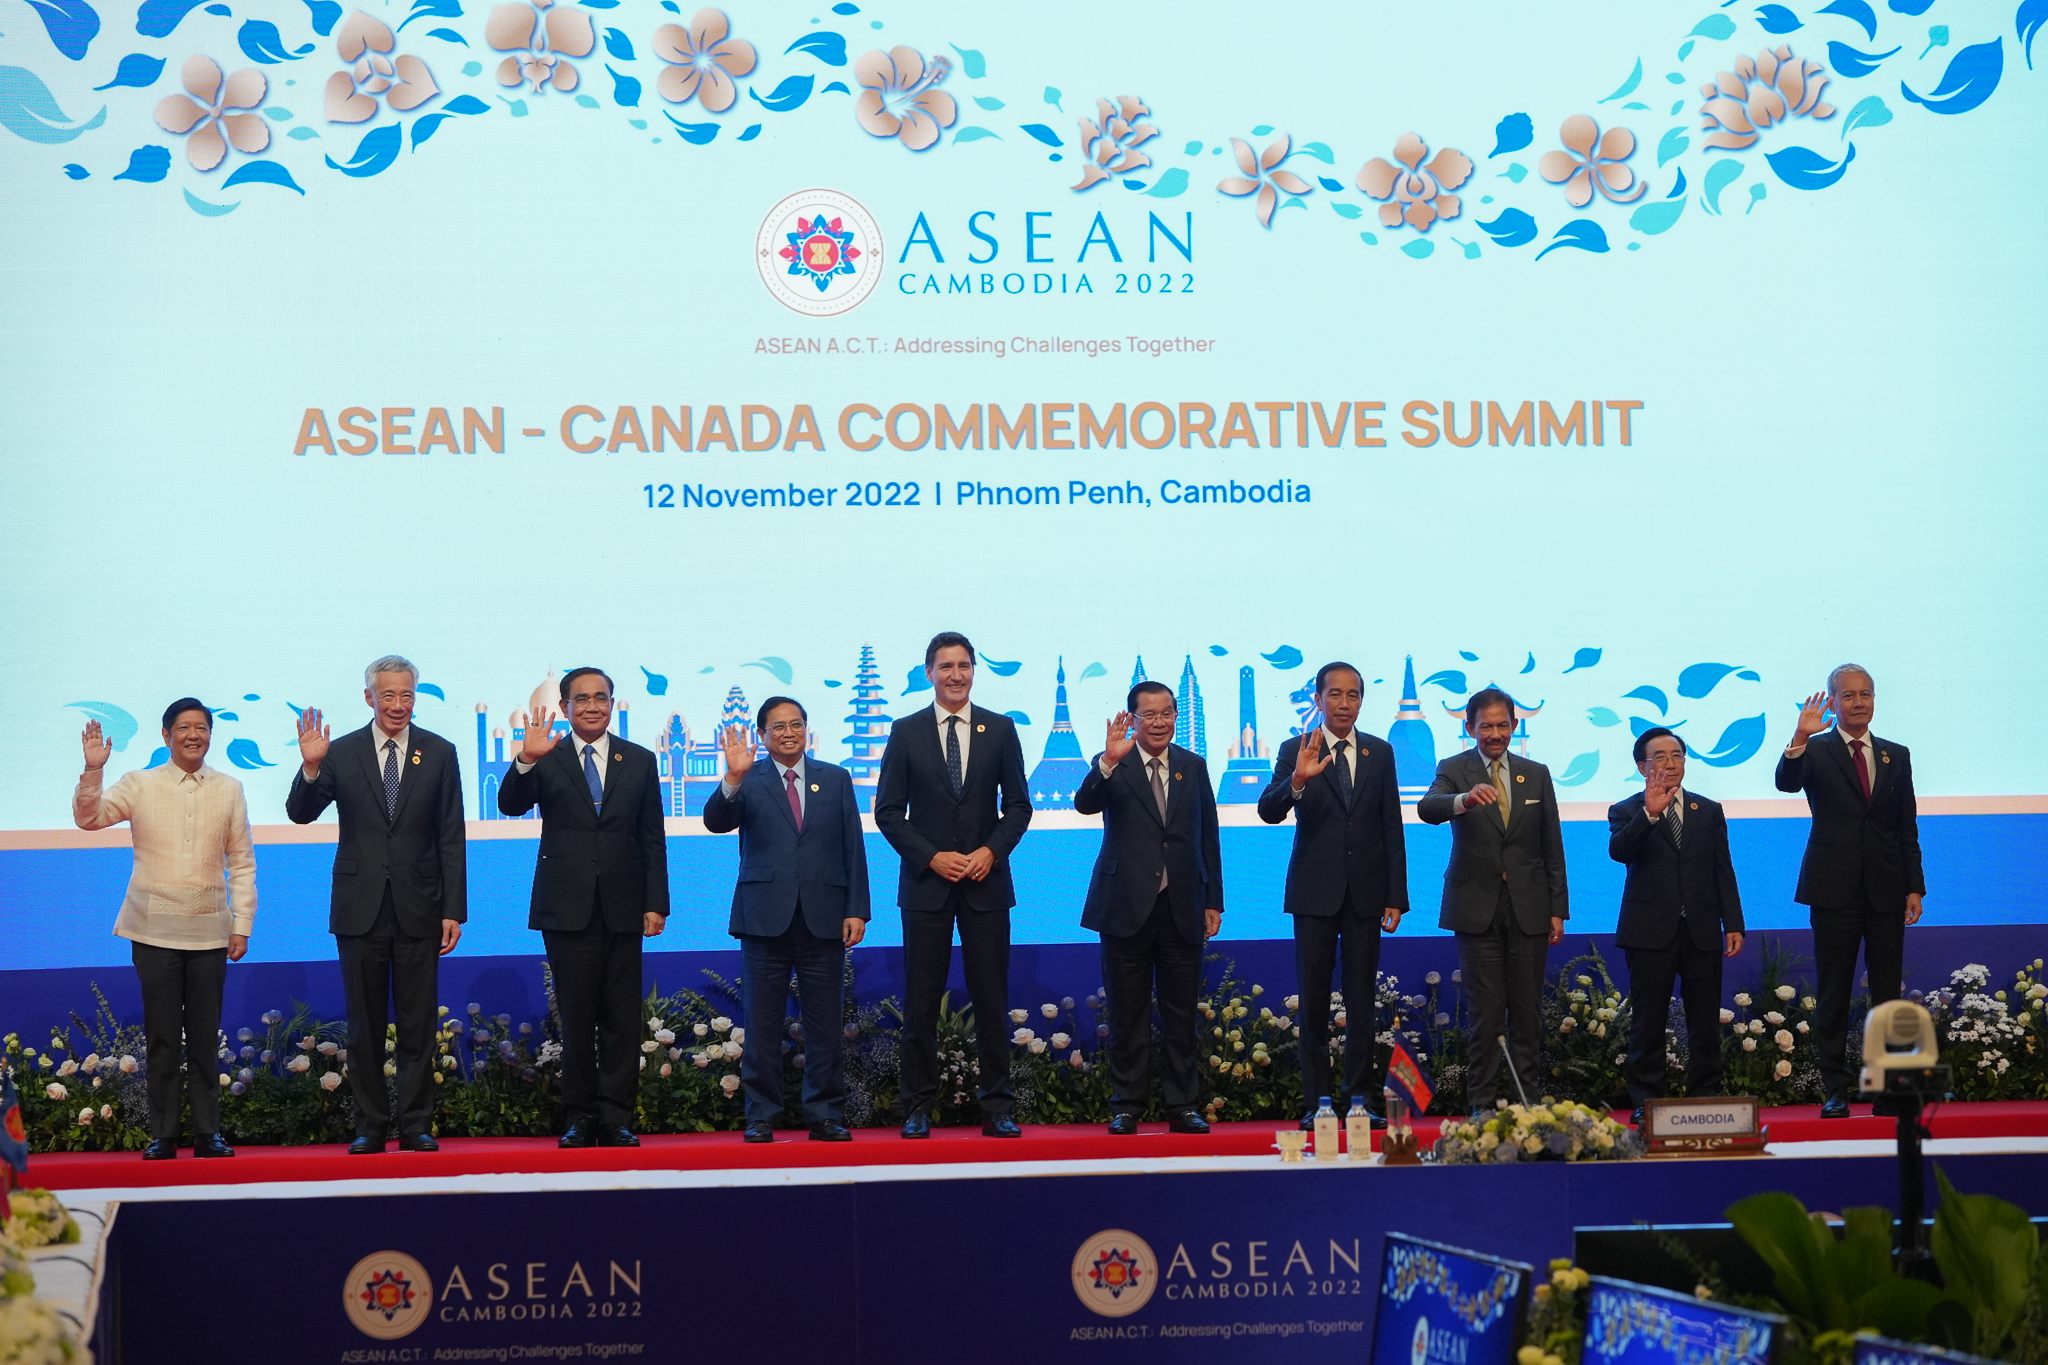 President Ferdinand Marcos Jr. on Saturday vowed to work with the  Association of Southeast Asian Nations (Asean) and Canada in protecting and promoting the rights of migrant workers, and women’s welfare.